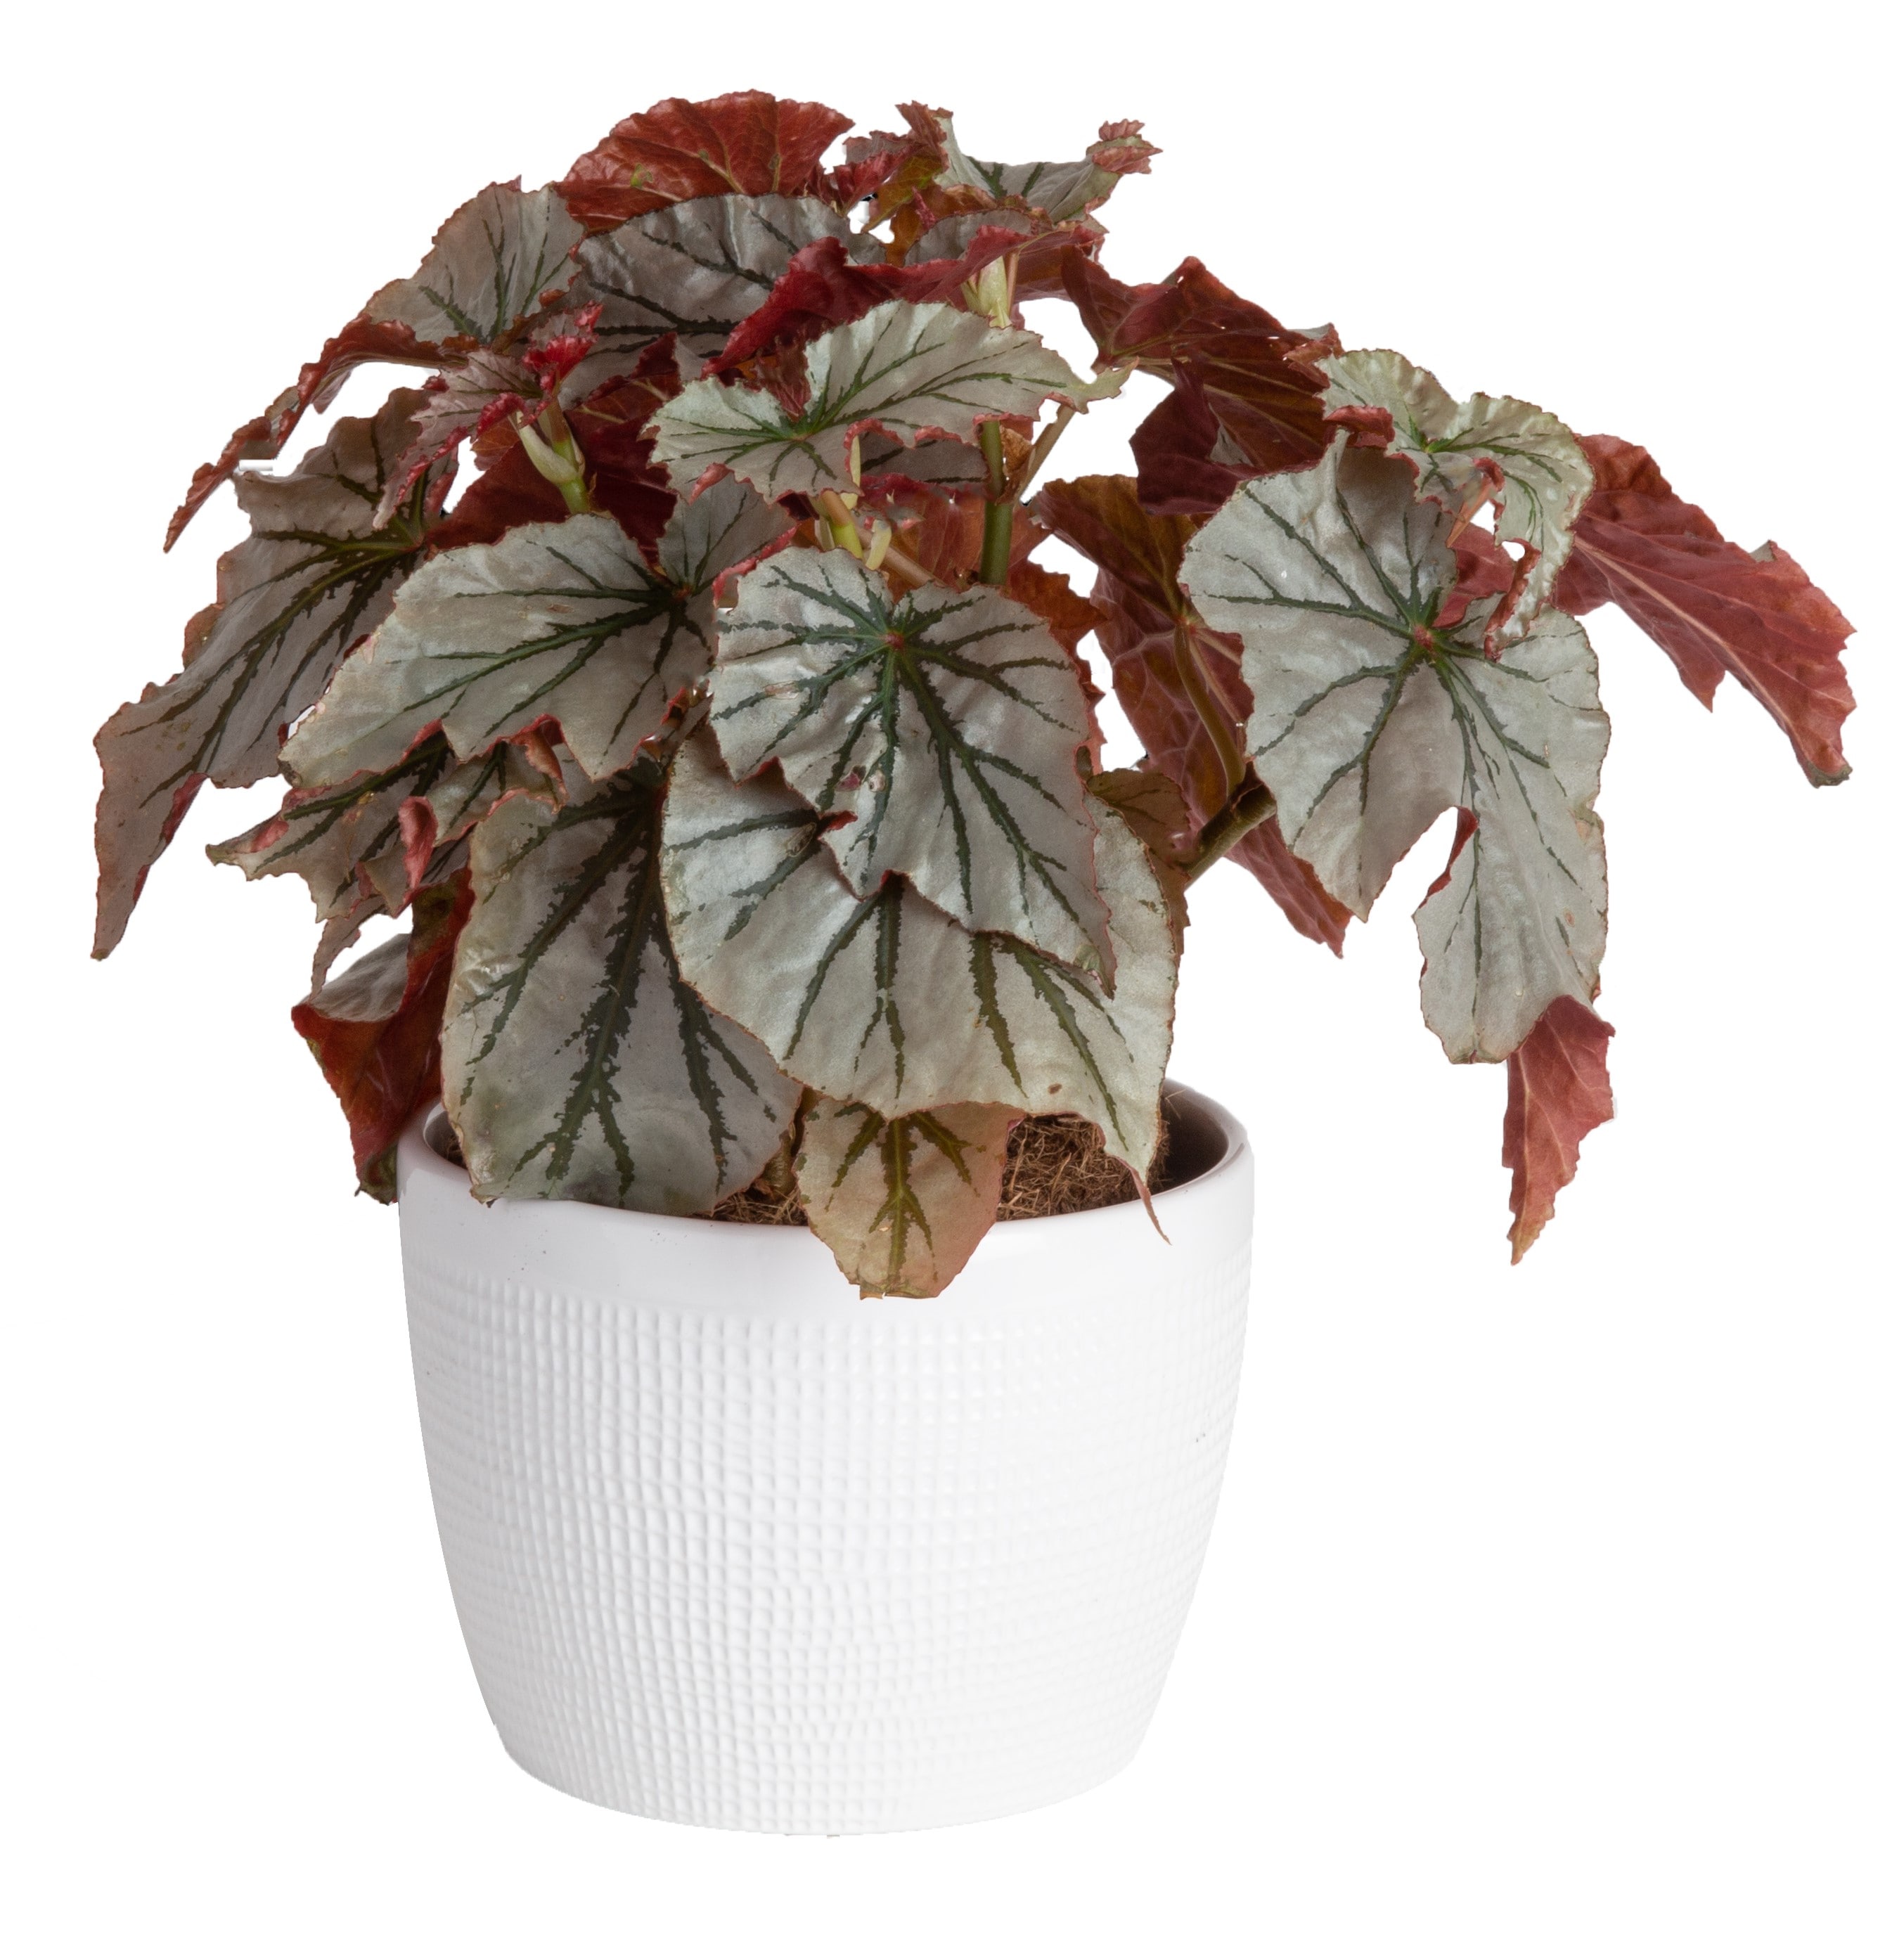 Costa Farms Begonia House plant in 6-in Planter at 